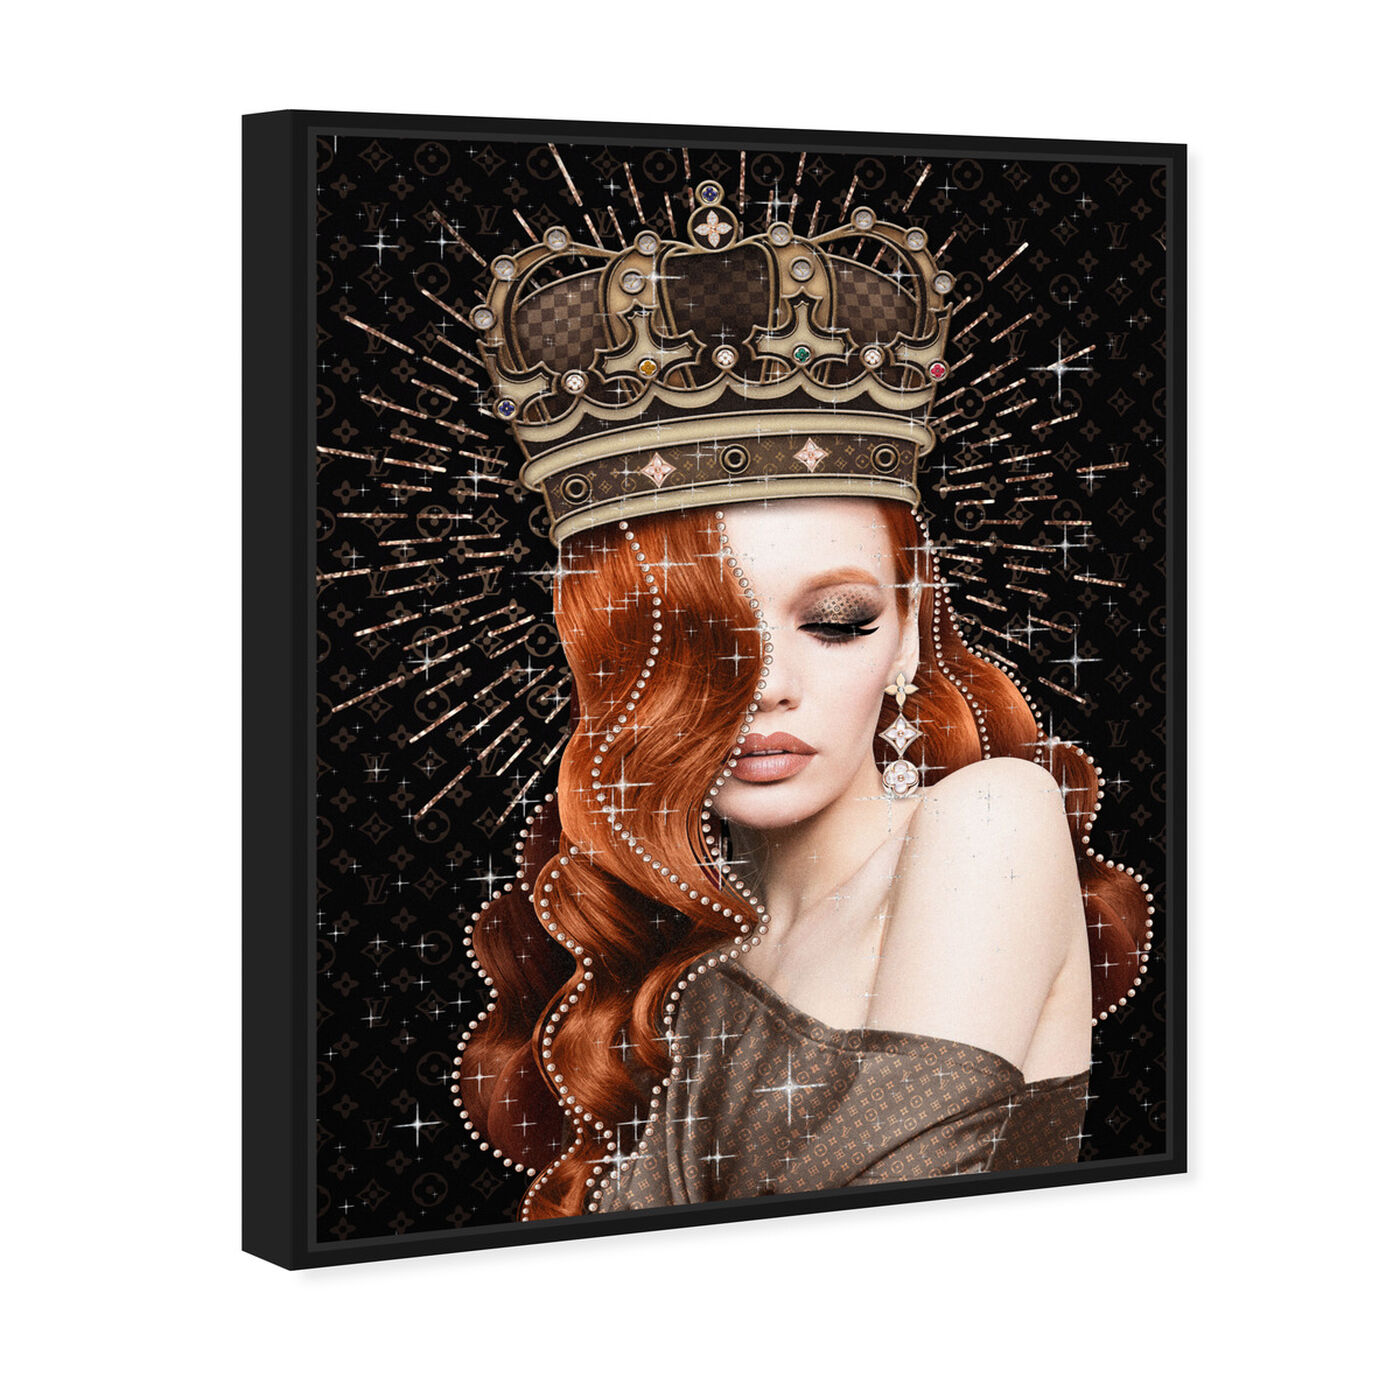 Angled view of Merida Queen featuring fashion and glam and portraits art.